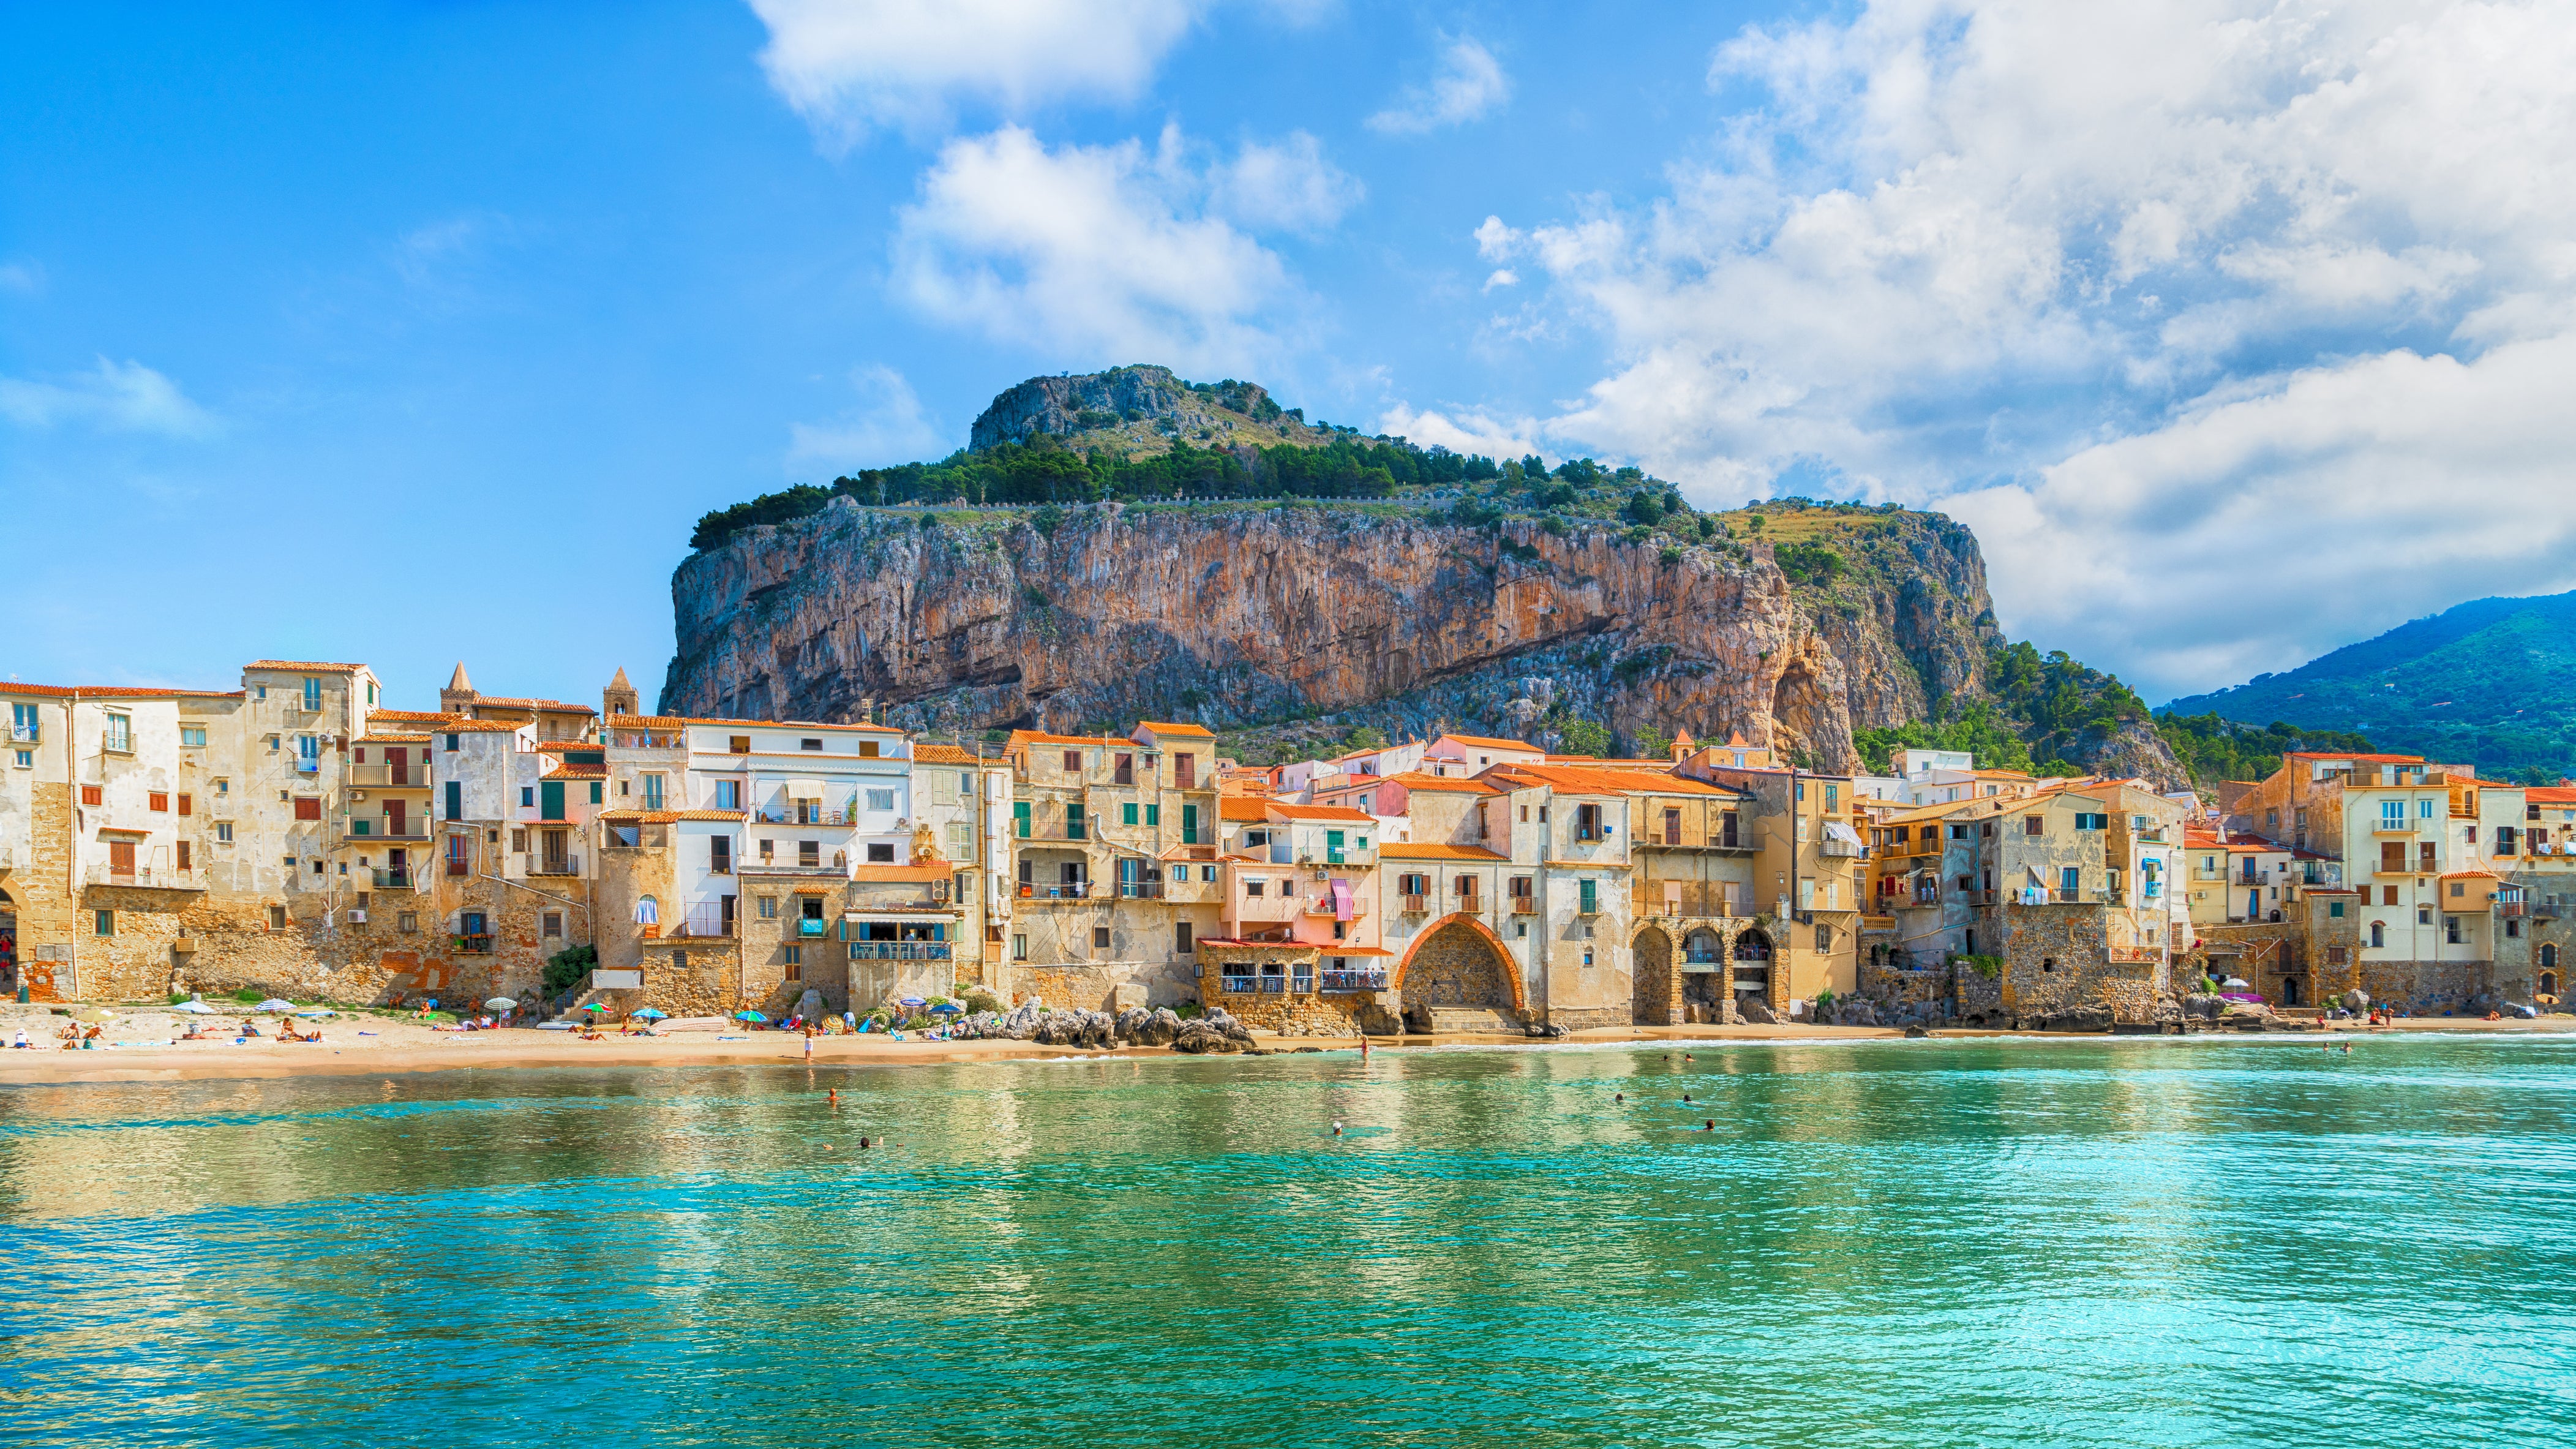 A 12th century Arab-Norman cathedral is the star of Cefalu